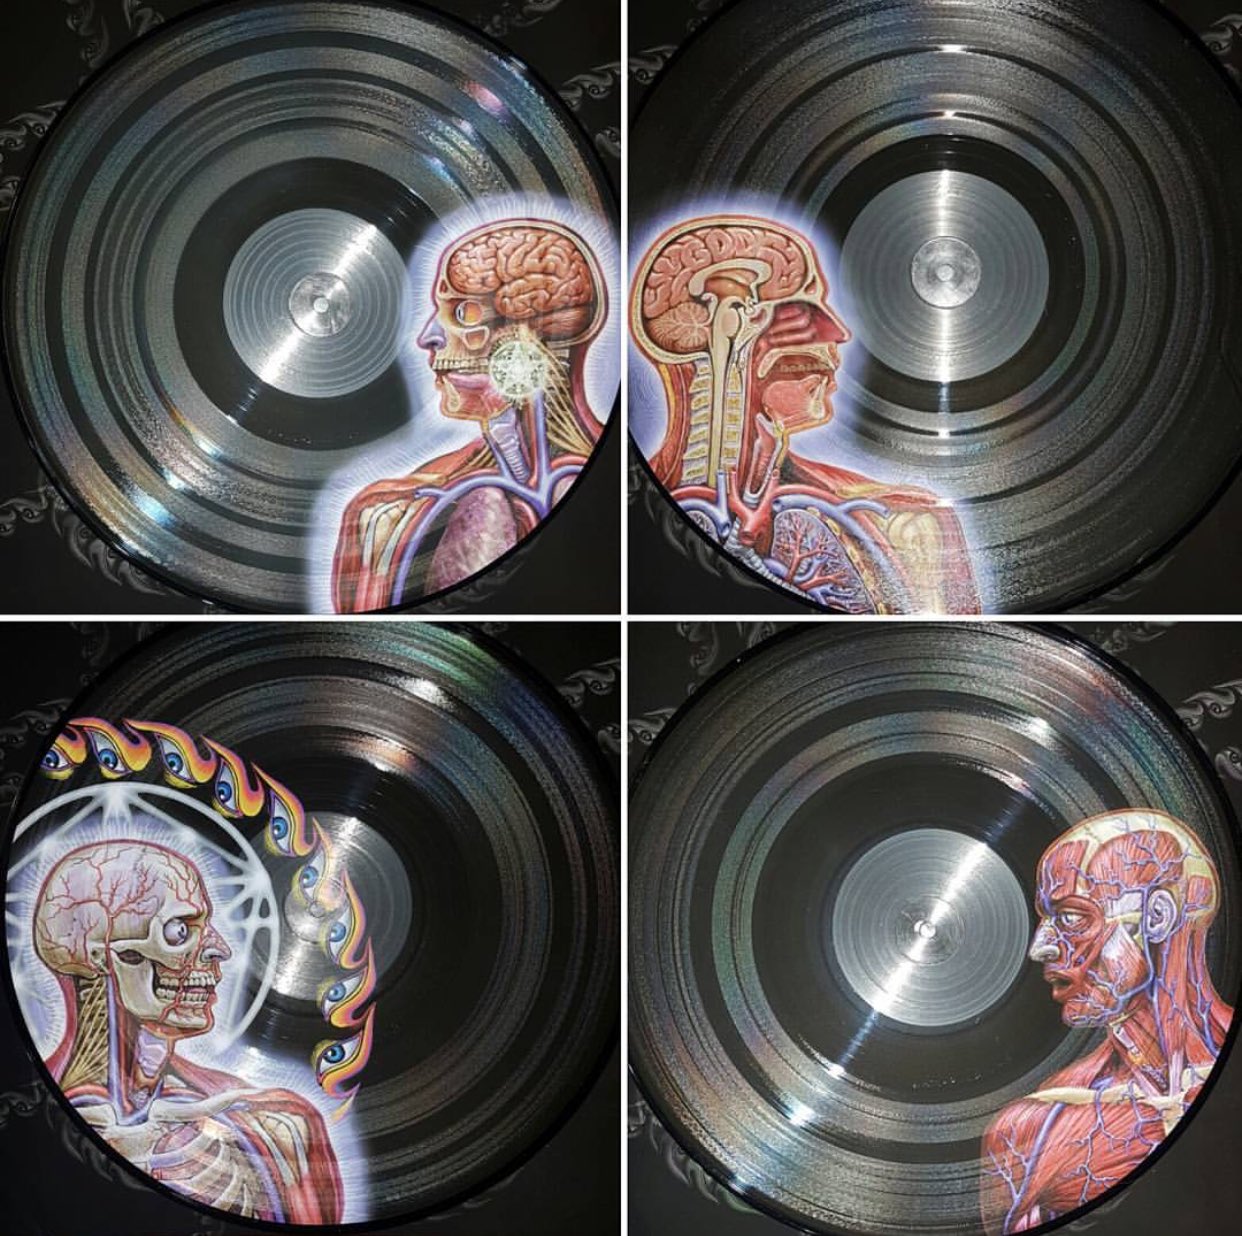 Erika Records on X: Tool / Lateralus. Limited edition picture